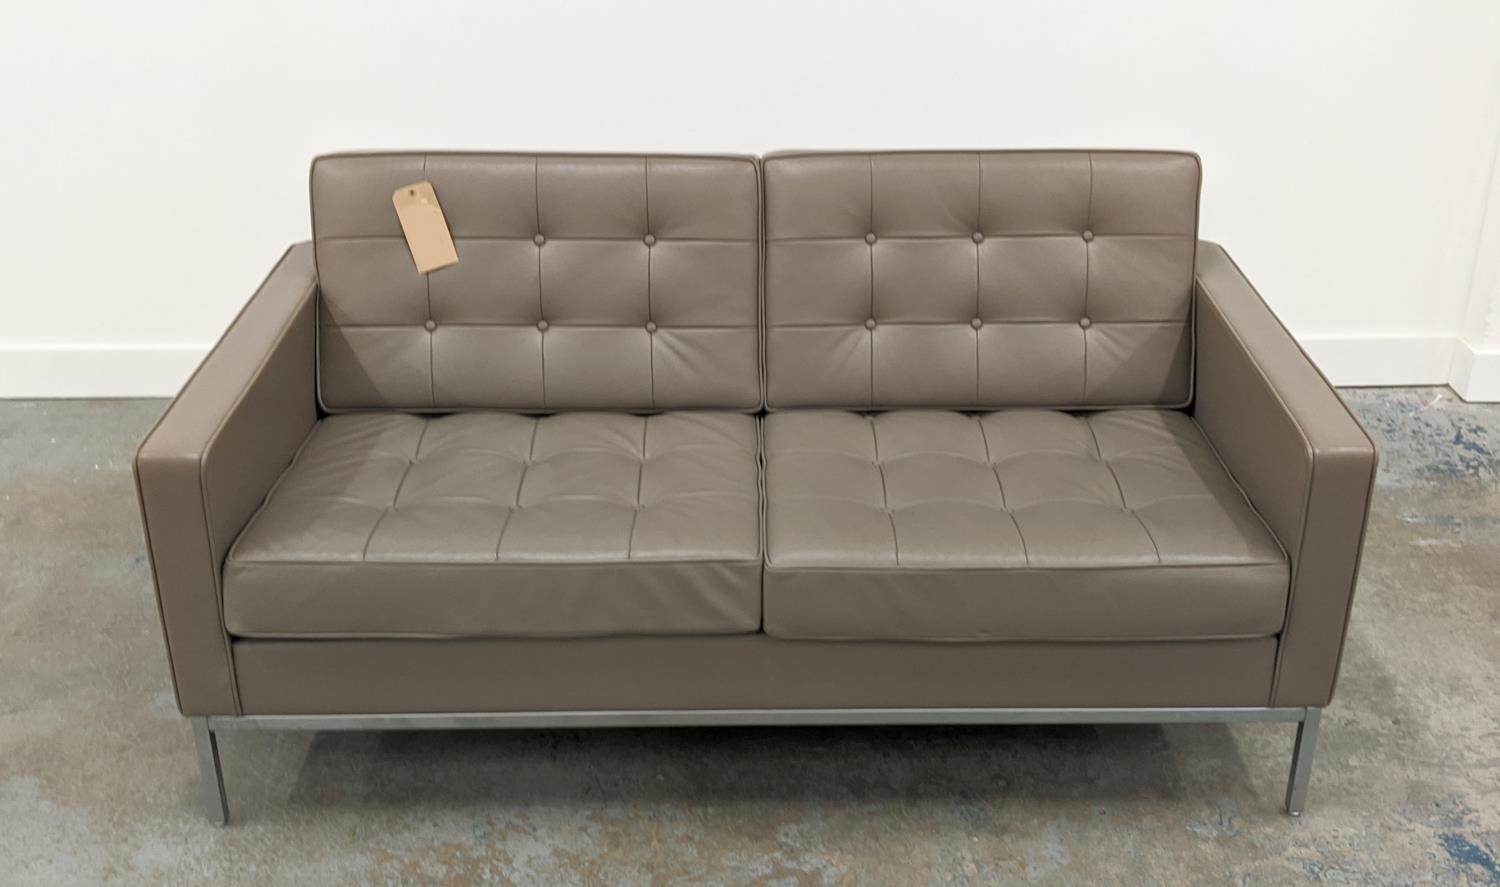 KNOLL FLORENCE KNOLL SOFA, by Florence Knoll, 159.5cm W. - Image 2 of 8